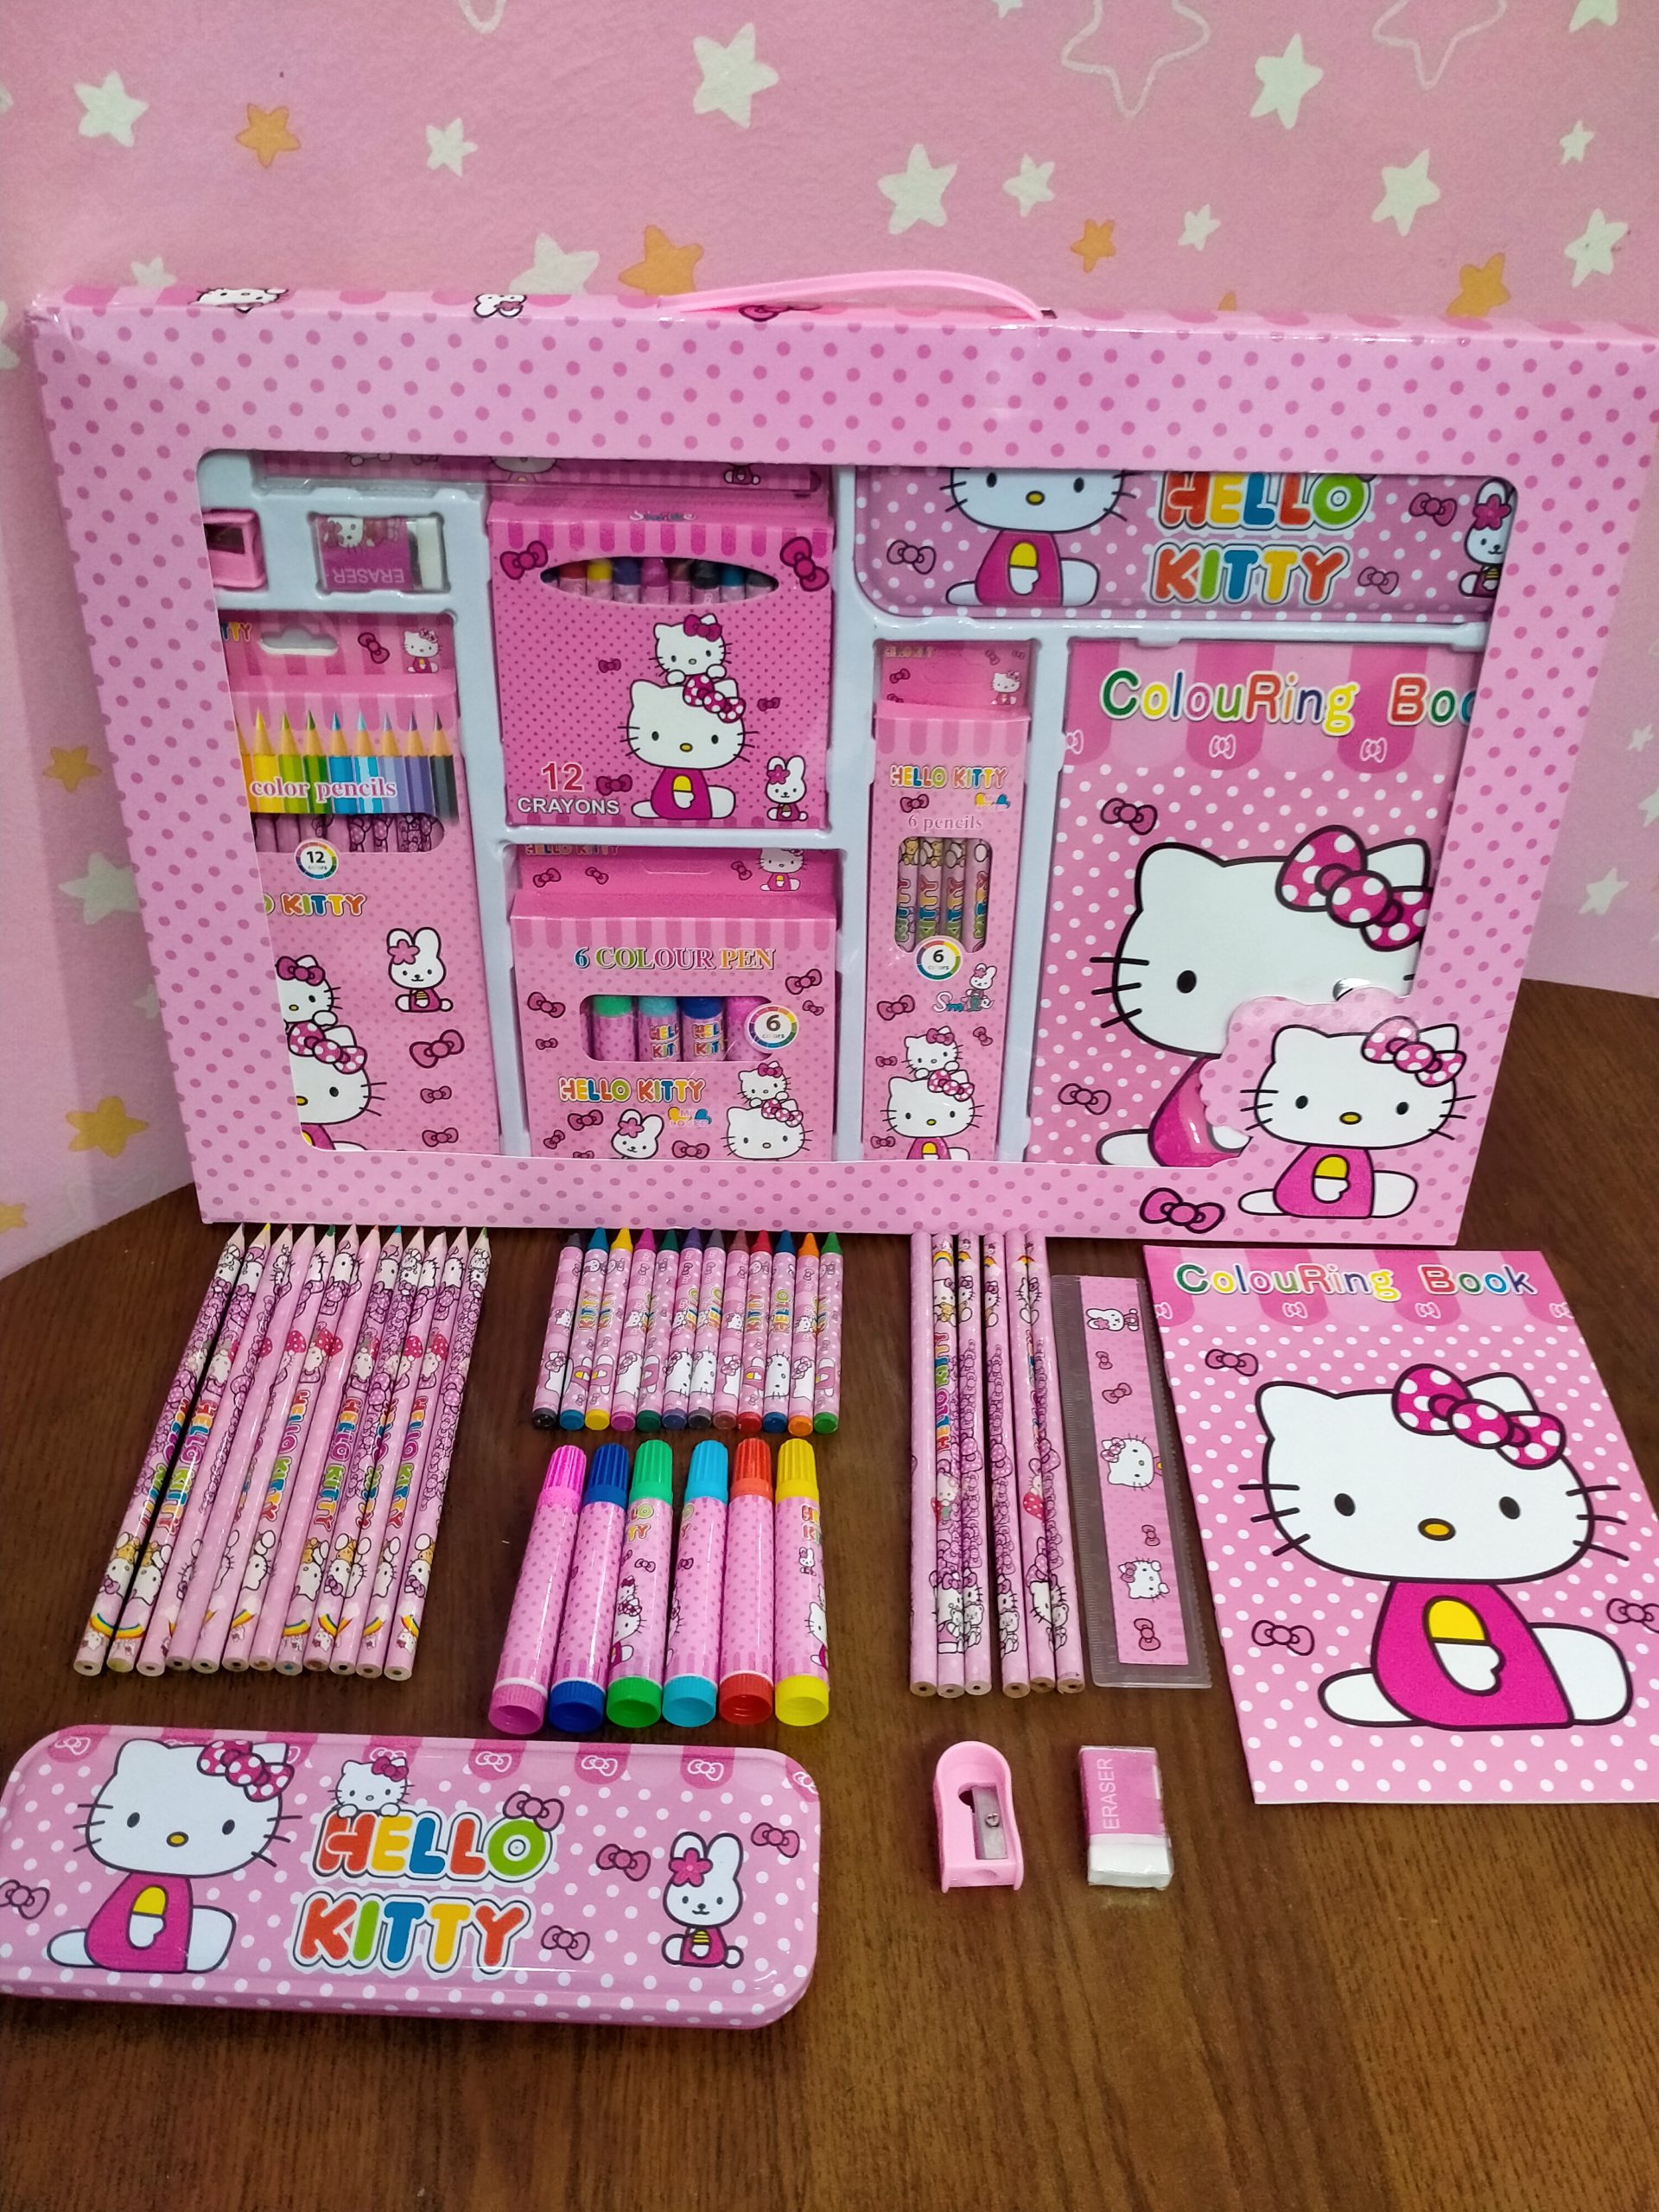 High Quality School Stationary Set For Your Kids In Dhaka Bangladesh